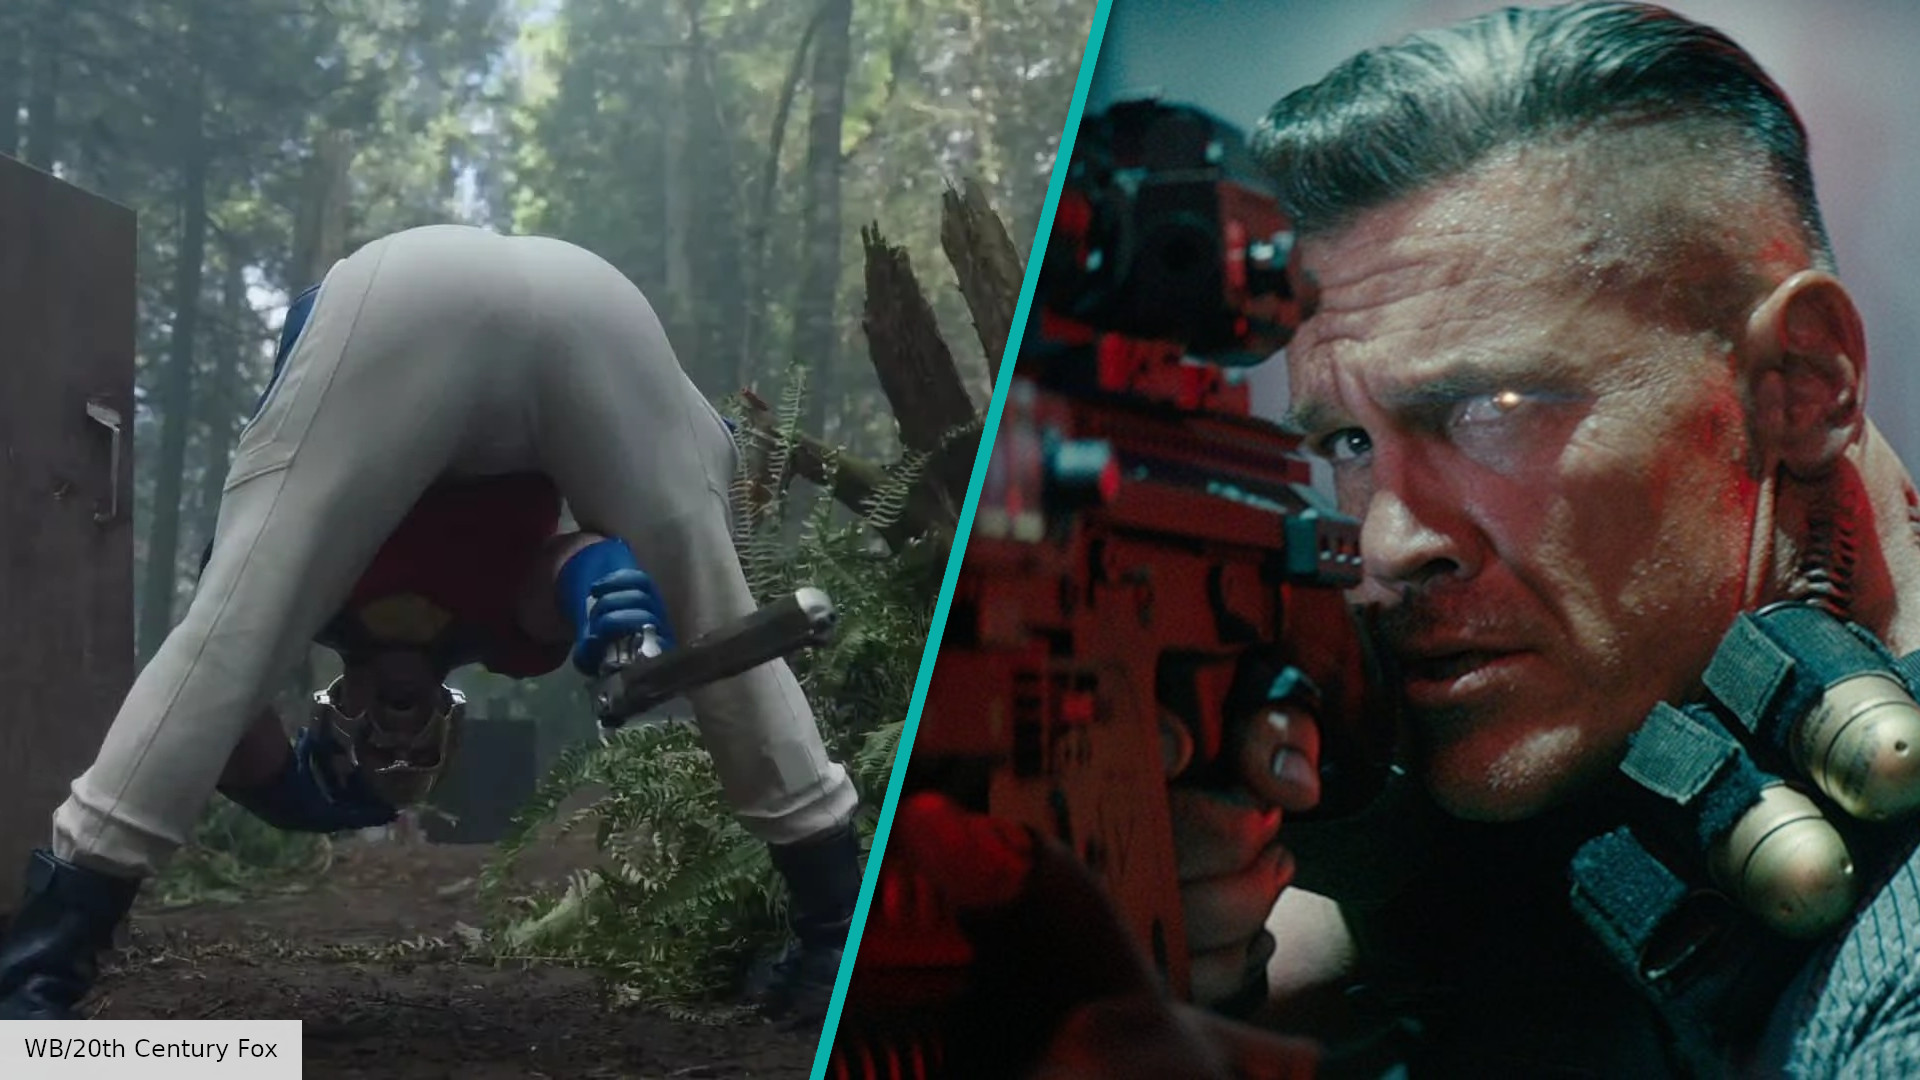 John Cena Xxx Video - John Cena auditioned for Cable in Deadpool 2 | The Digital Fix